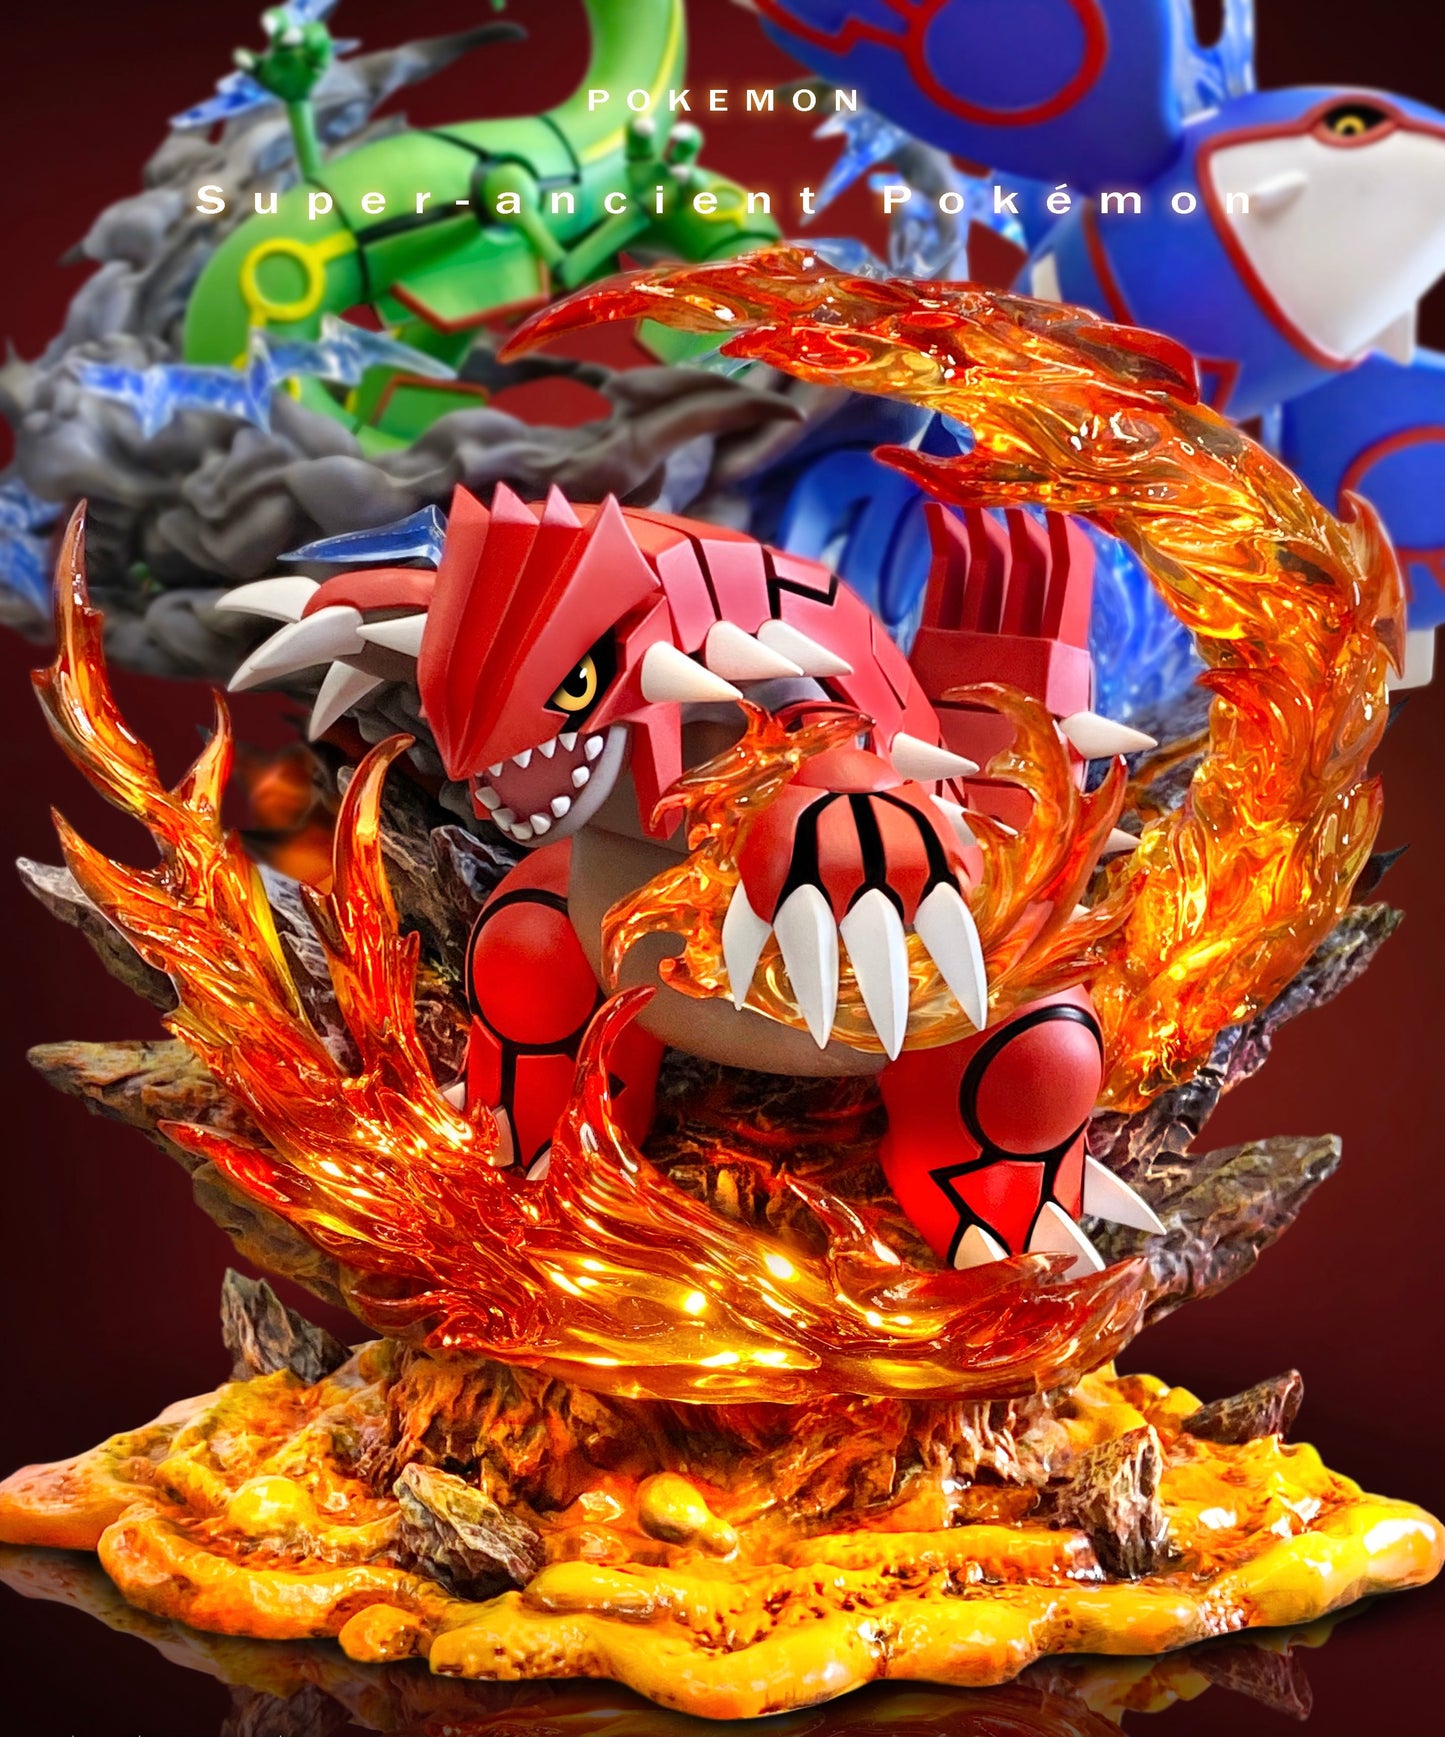 [PREORDER CLOSED] Statue [PPAP] - Kyogre & Groudon & Rayquaza